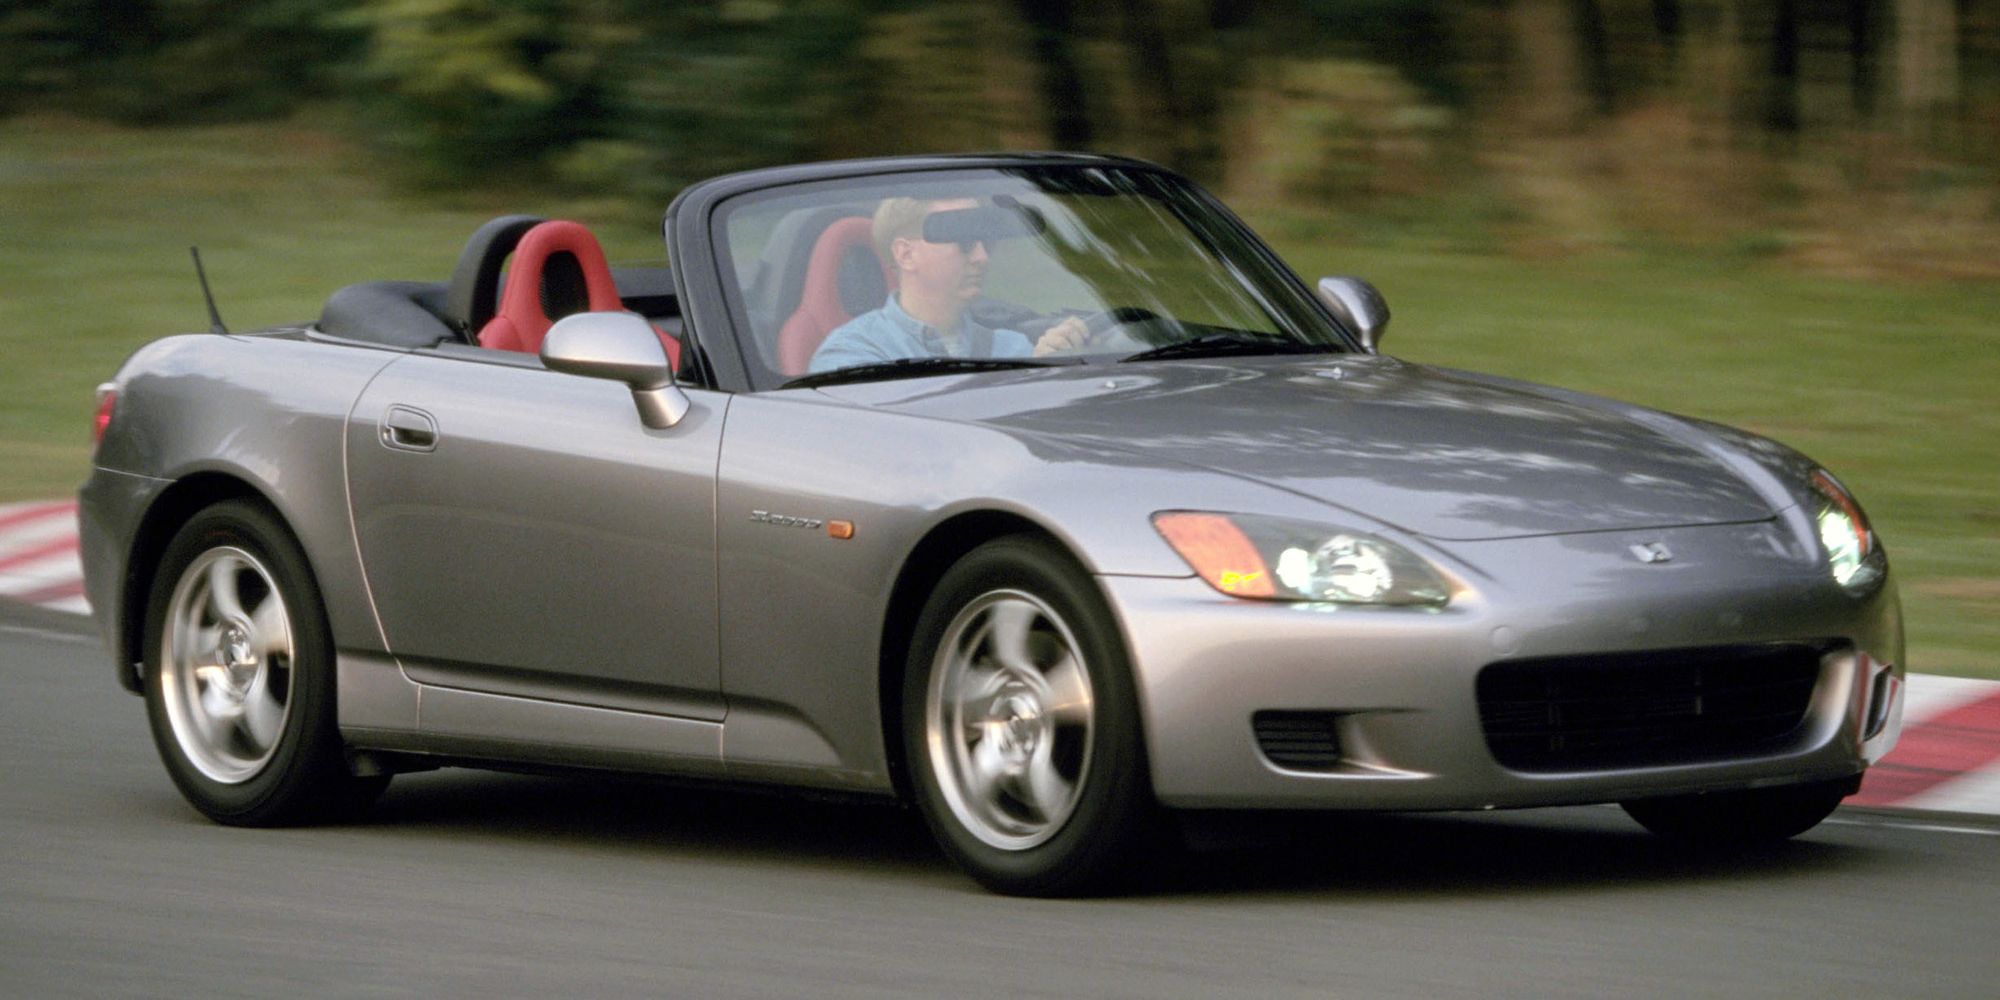 A silver S2000 on track